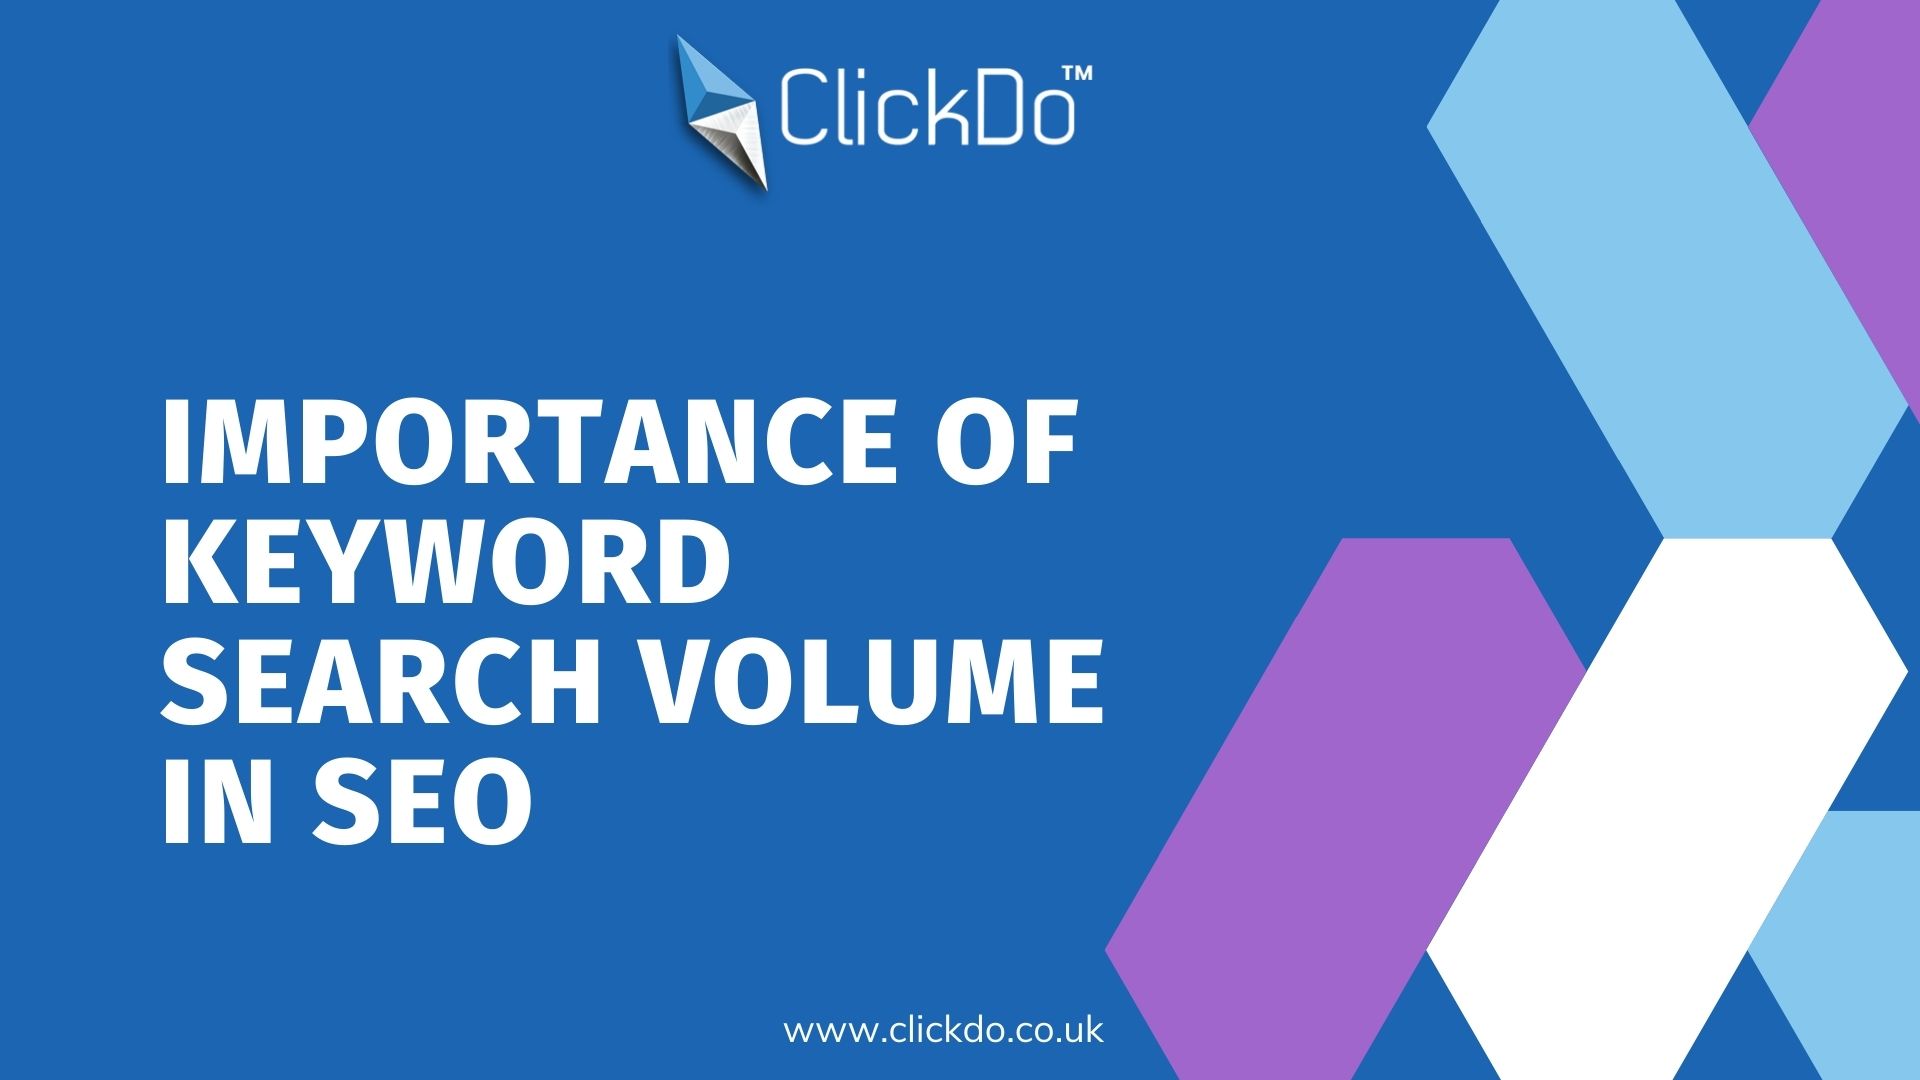 Importance of keyword search volume in SEO